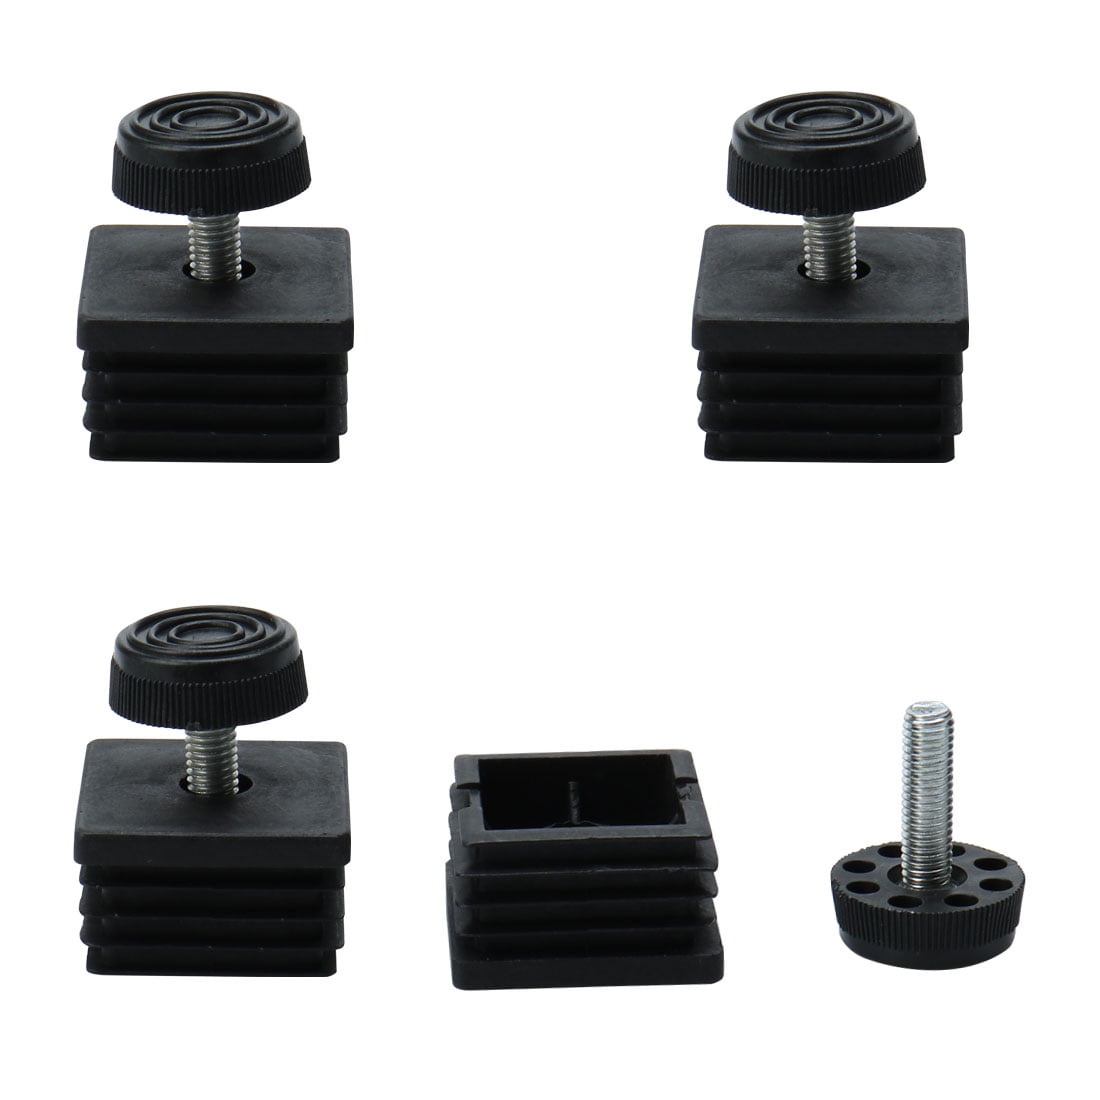 uxcell Square Table Desk Tube Insert Adjustable Leveling Foot Kit 48mm x 48mm 4 Sets